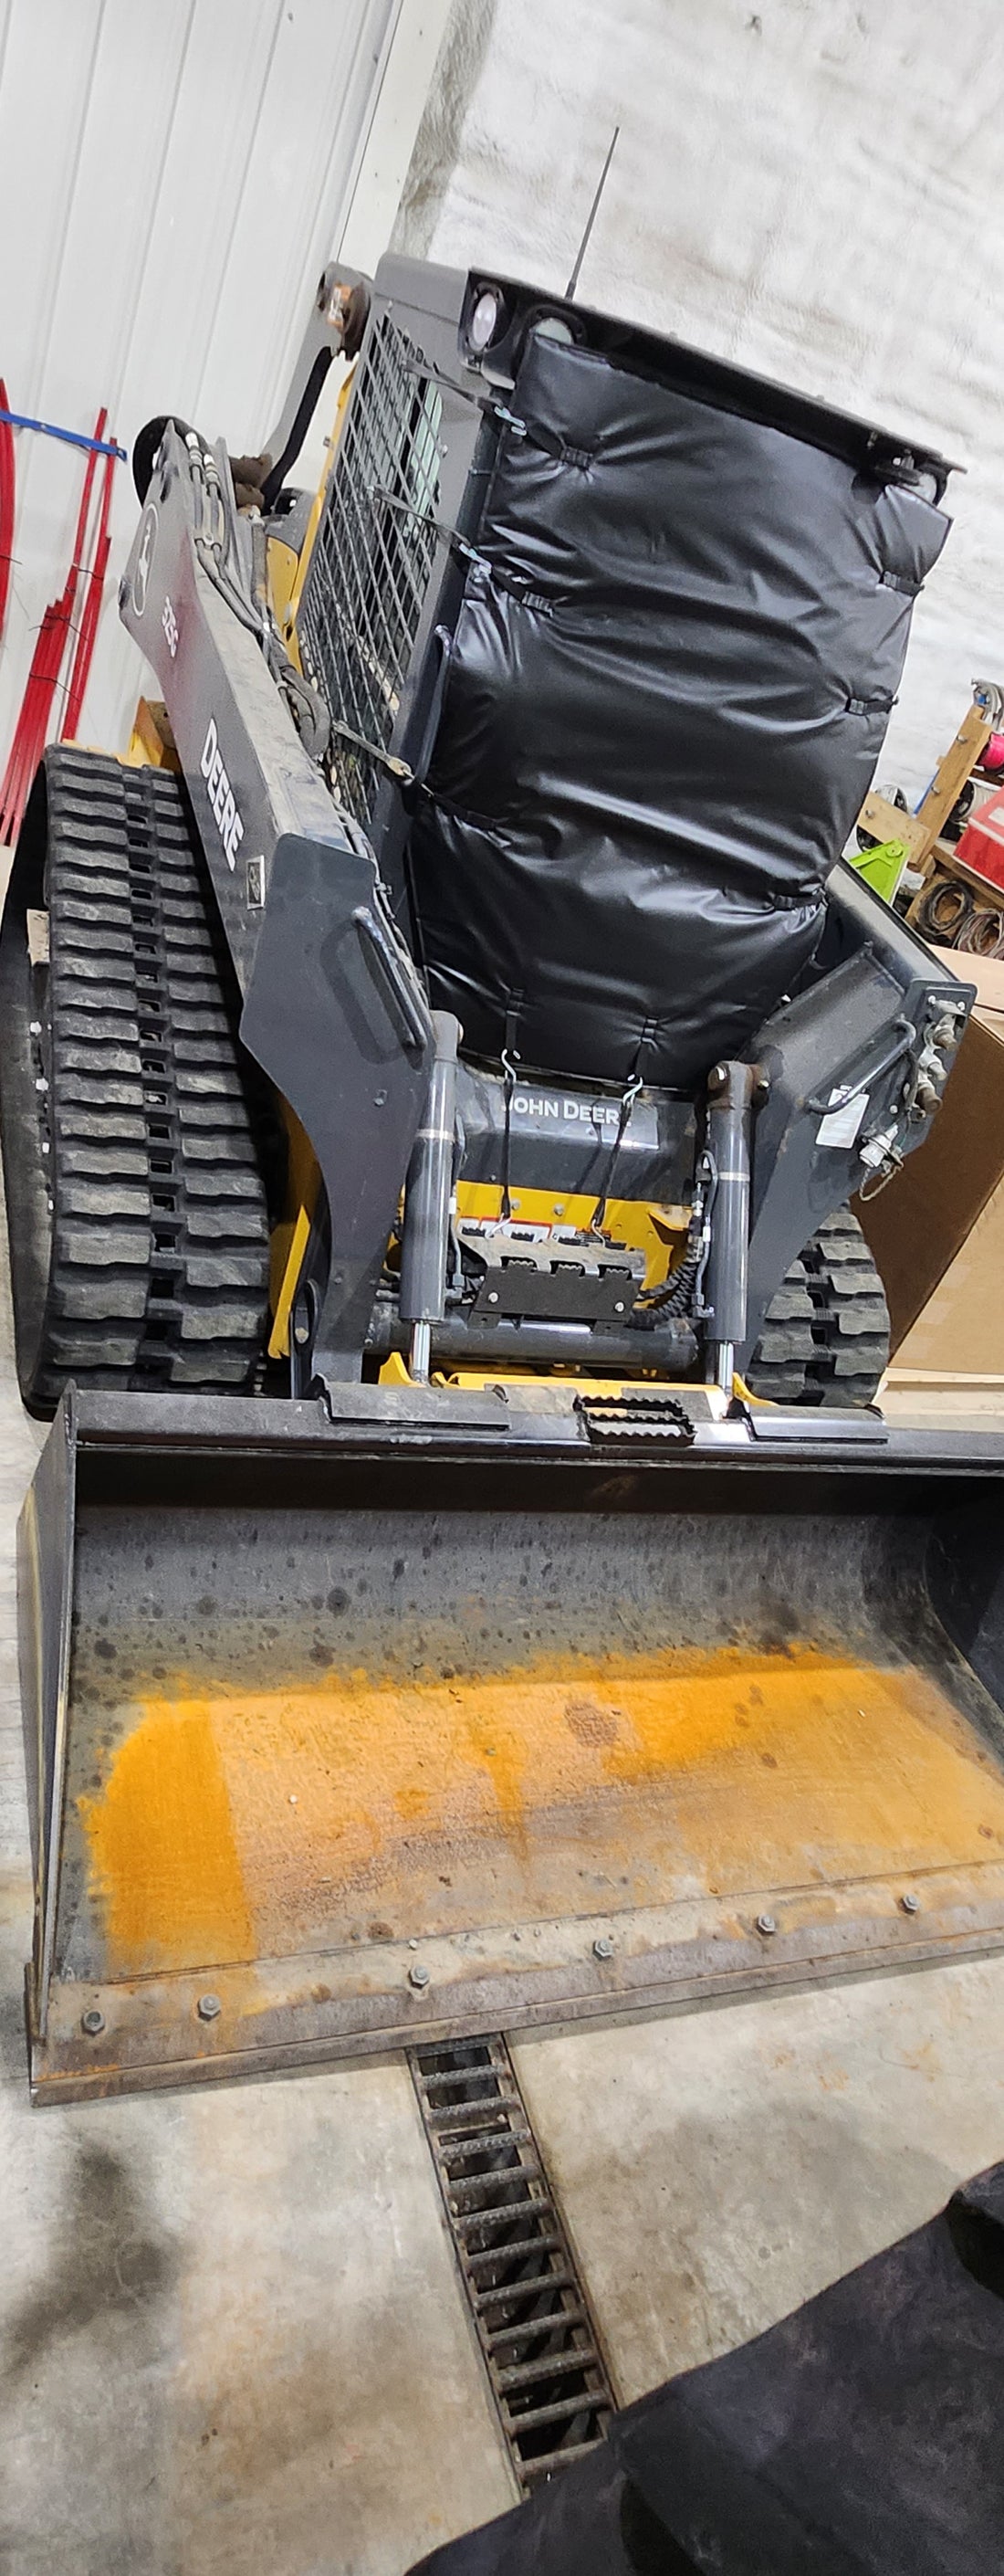 Skid Steer, Mini Excavator or Small Window Transport Windshield Protection - Add your custom dimensions (length & width) in the comment section at checkout!